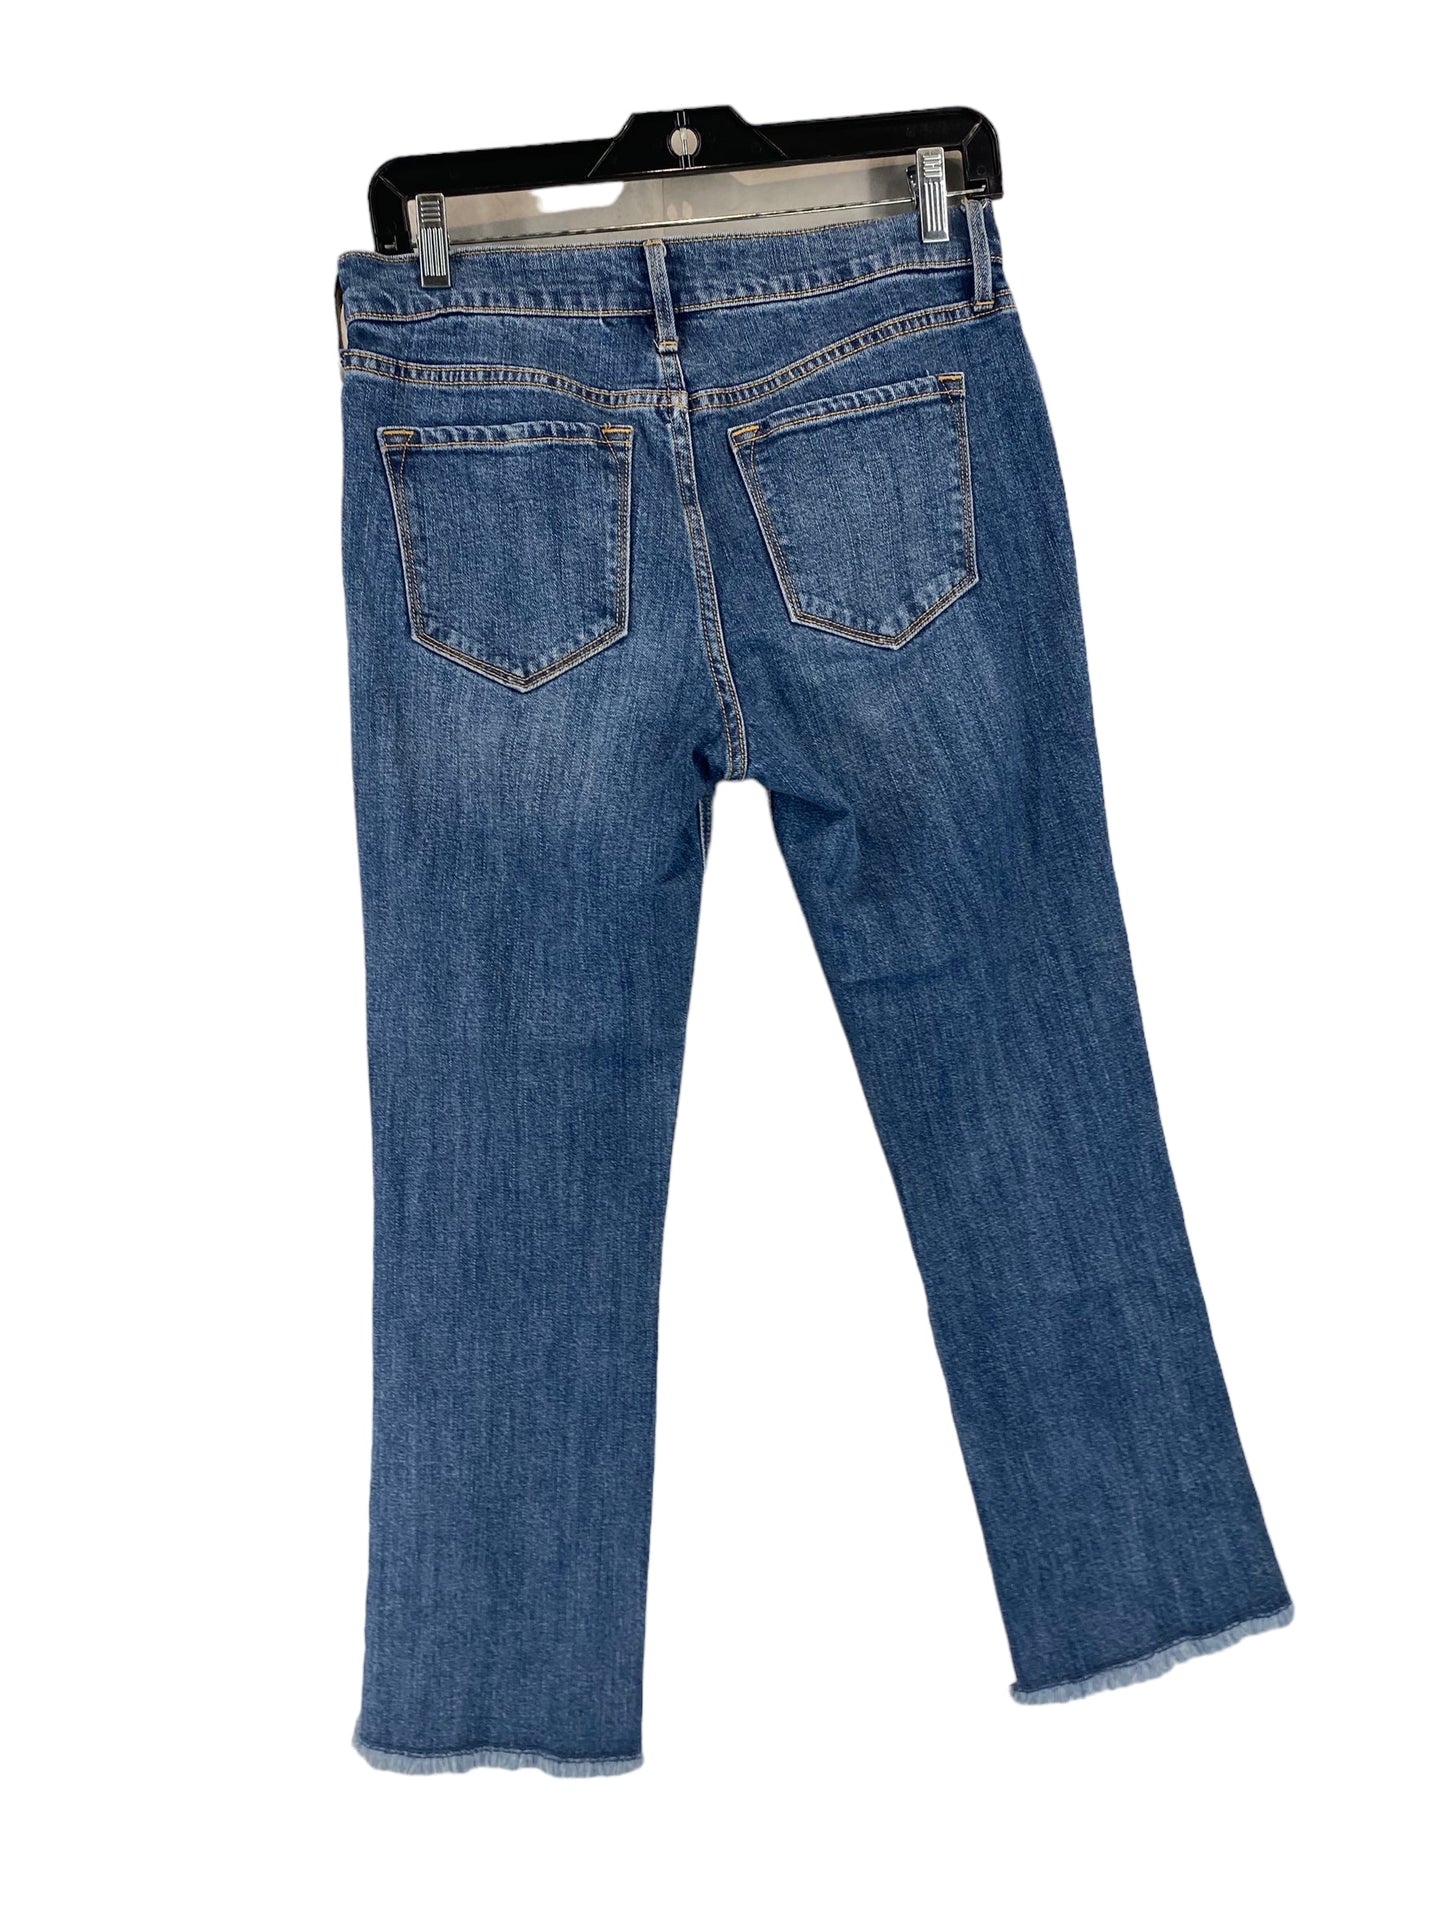 Jeans Cropped By Old Navy  Size: 2